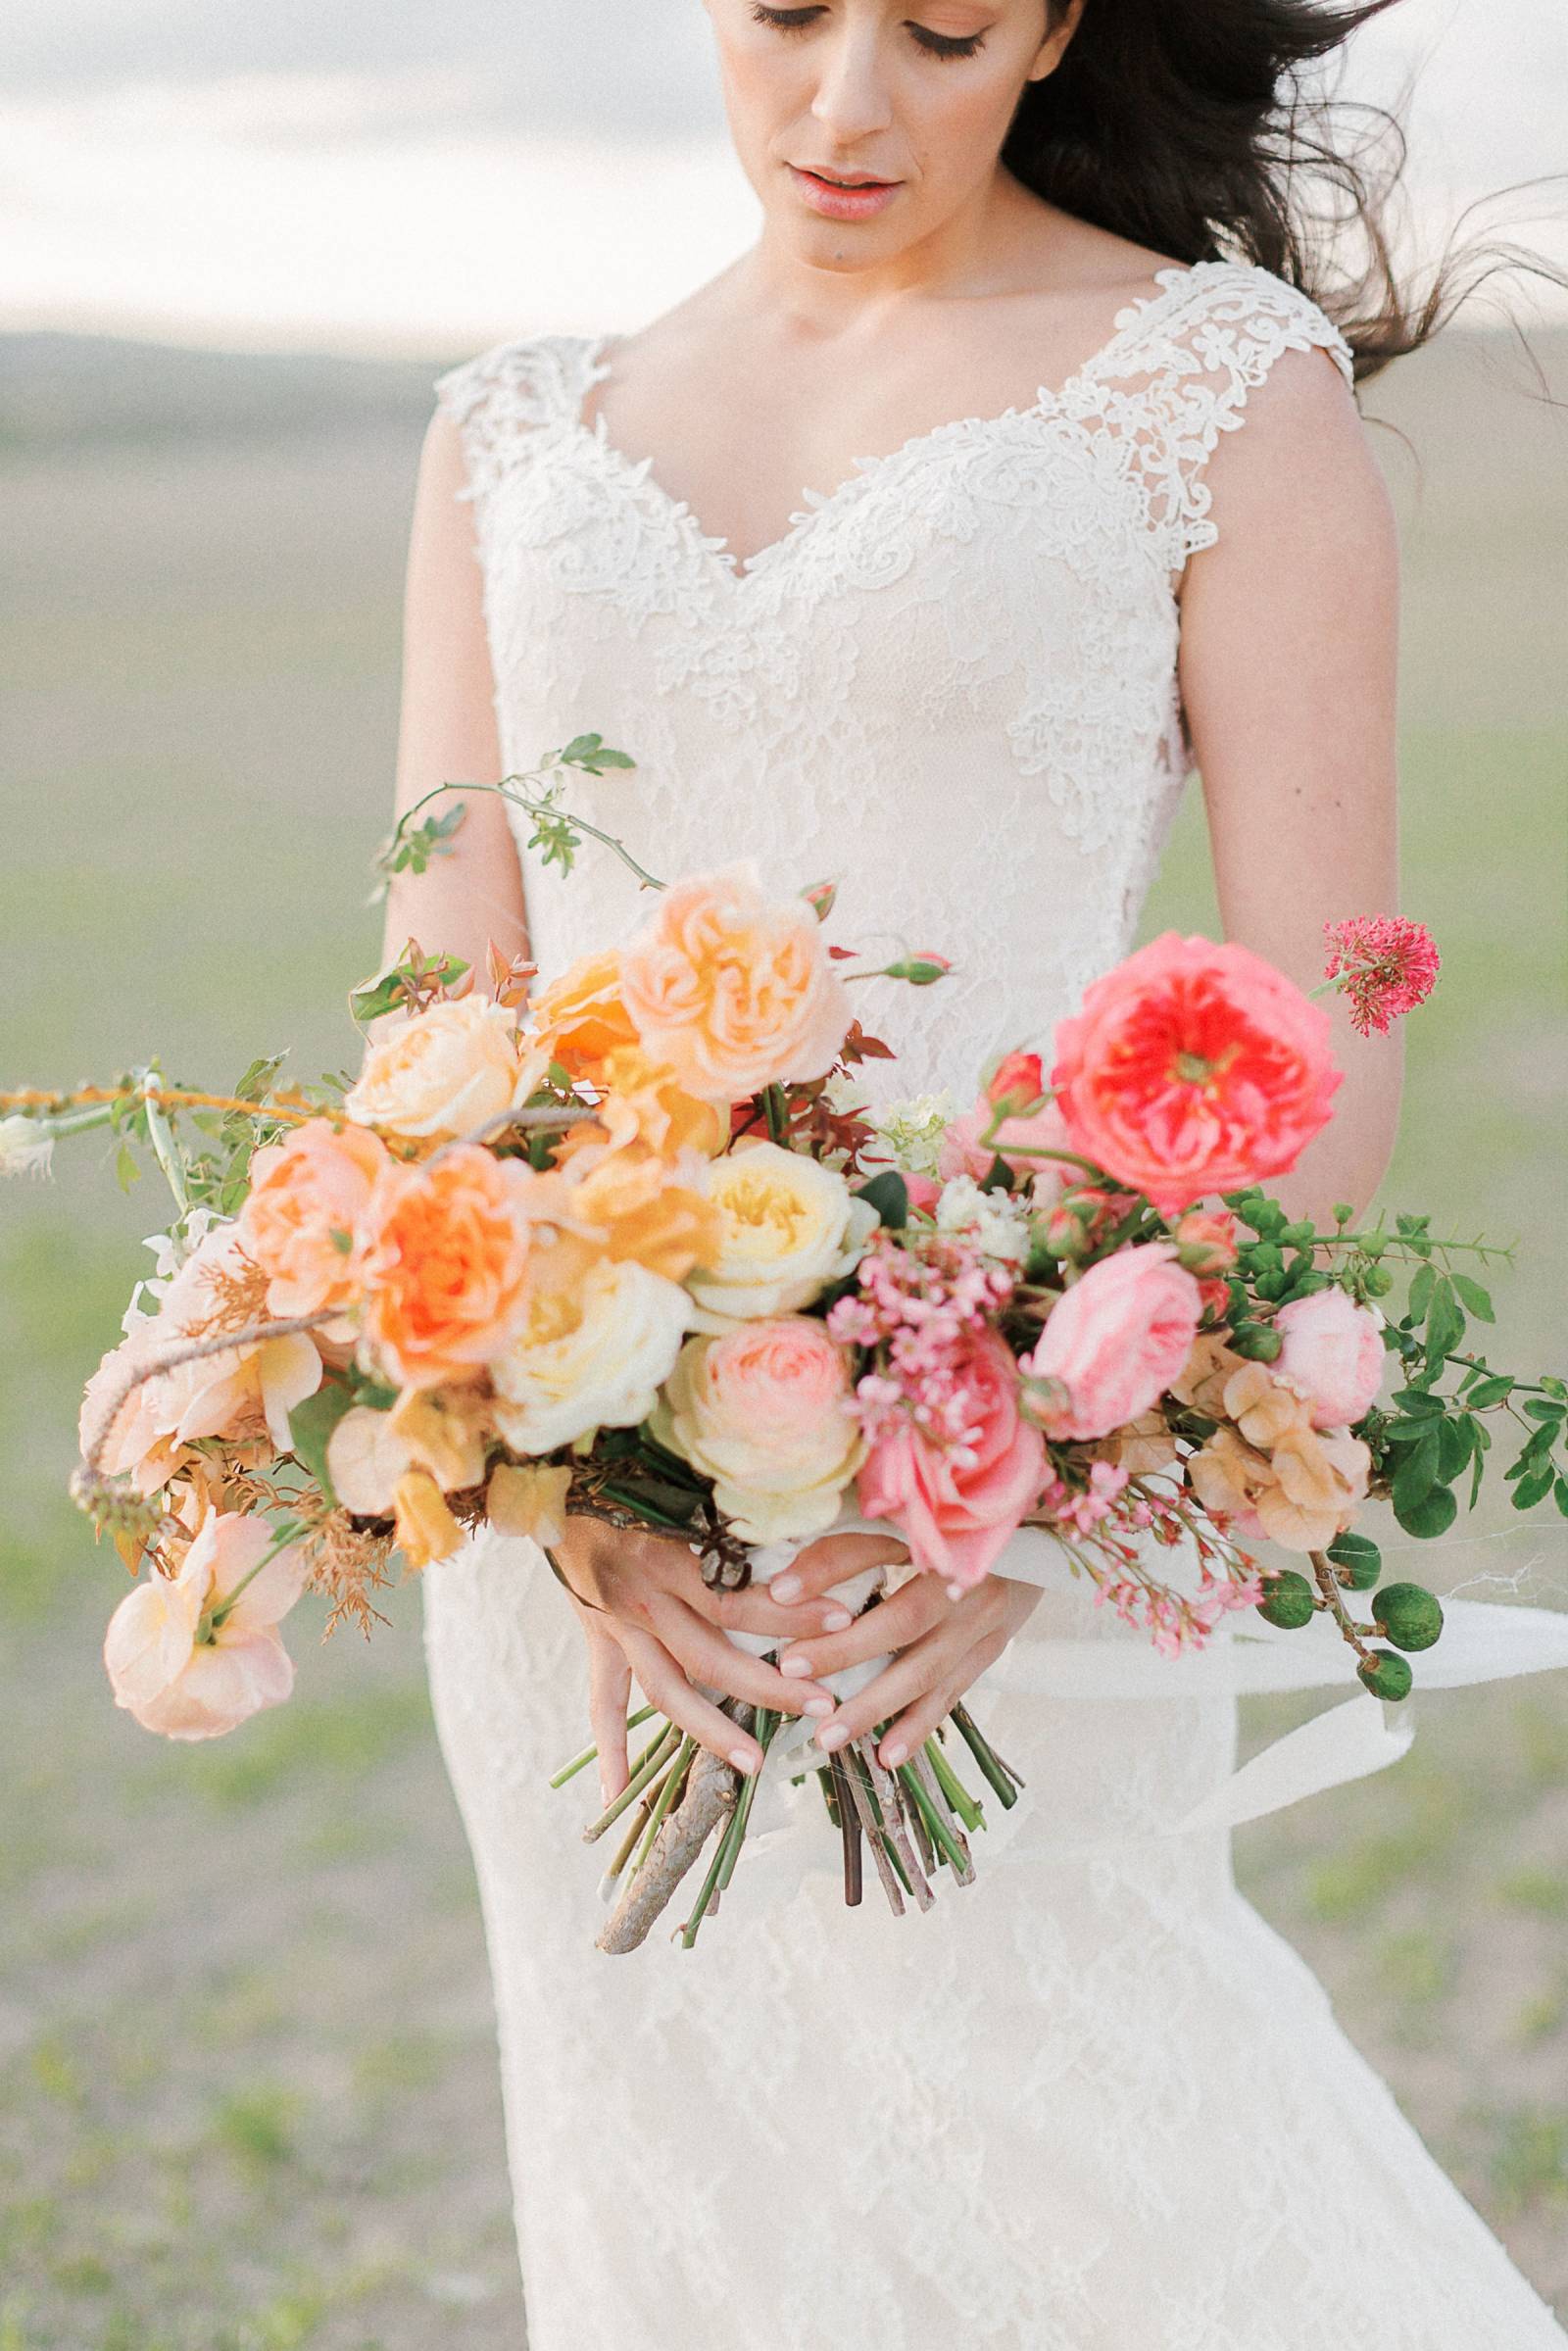 Organic chic meets timeless beauty in this Tuscan bridal inspiration ...